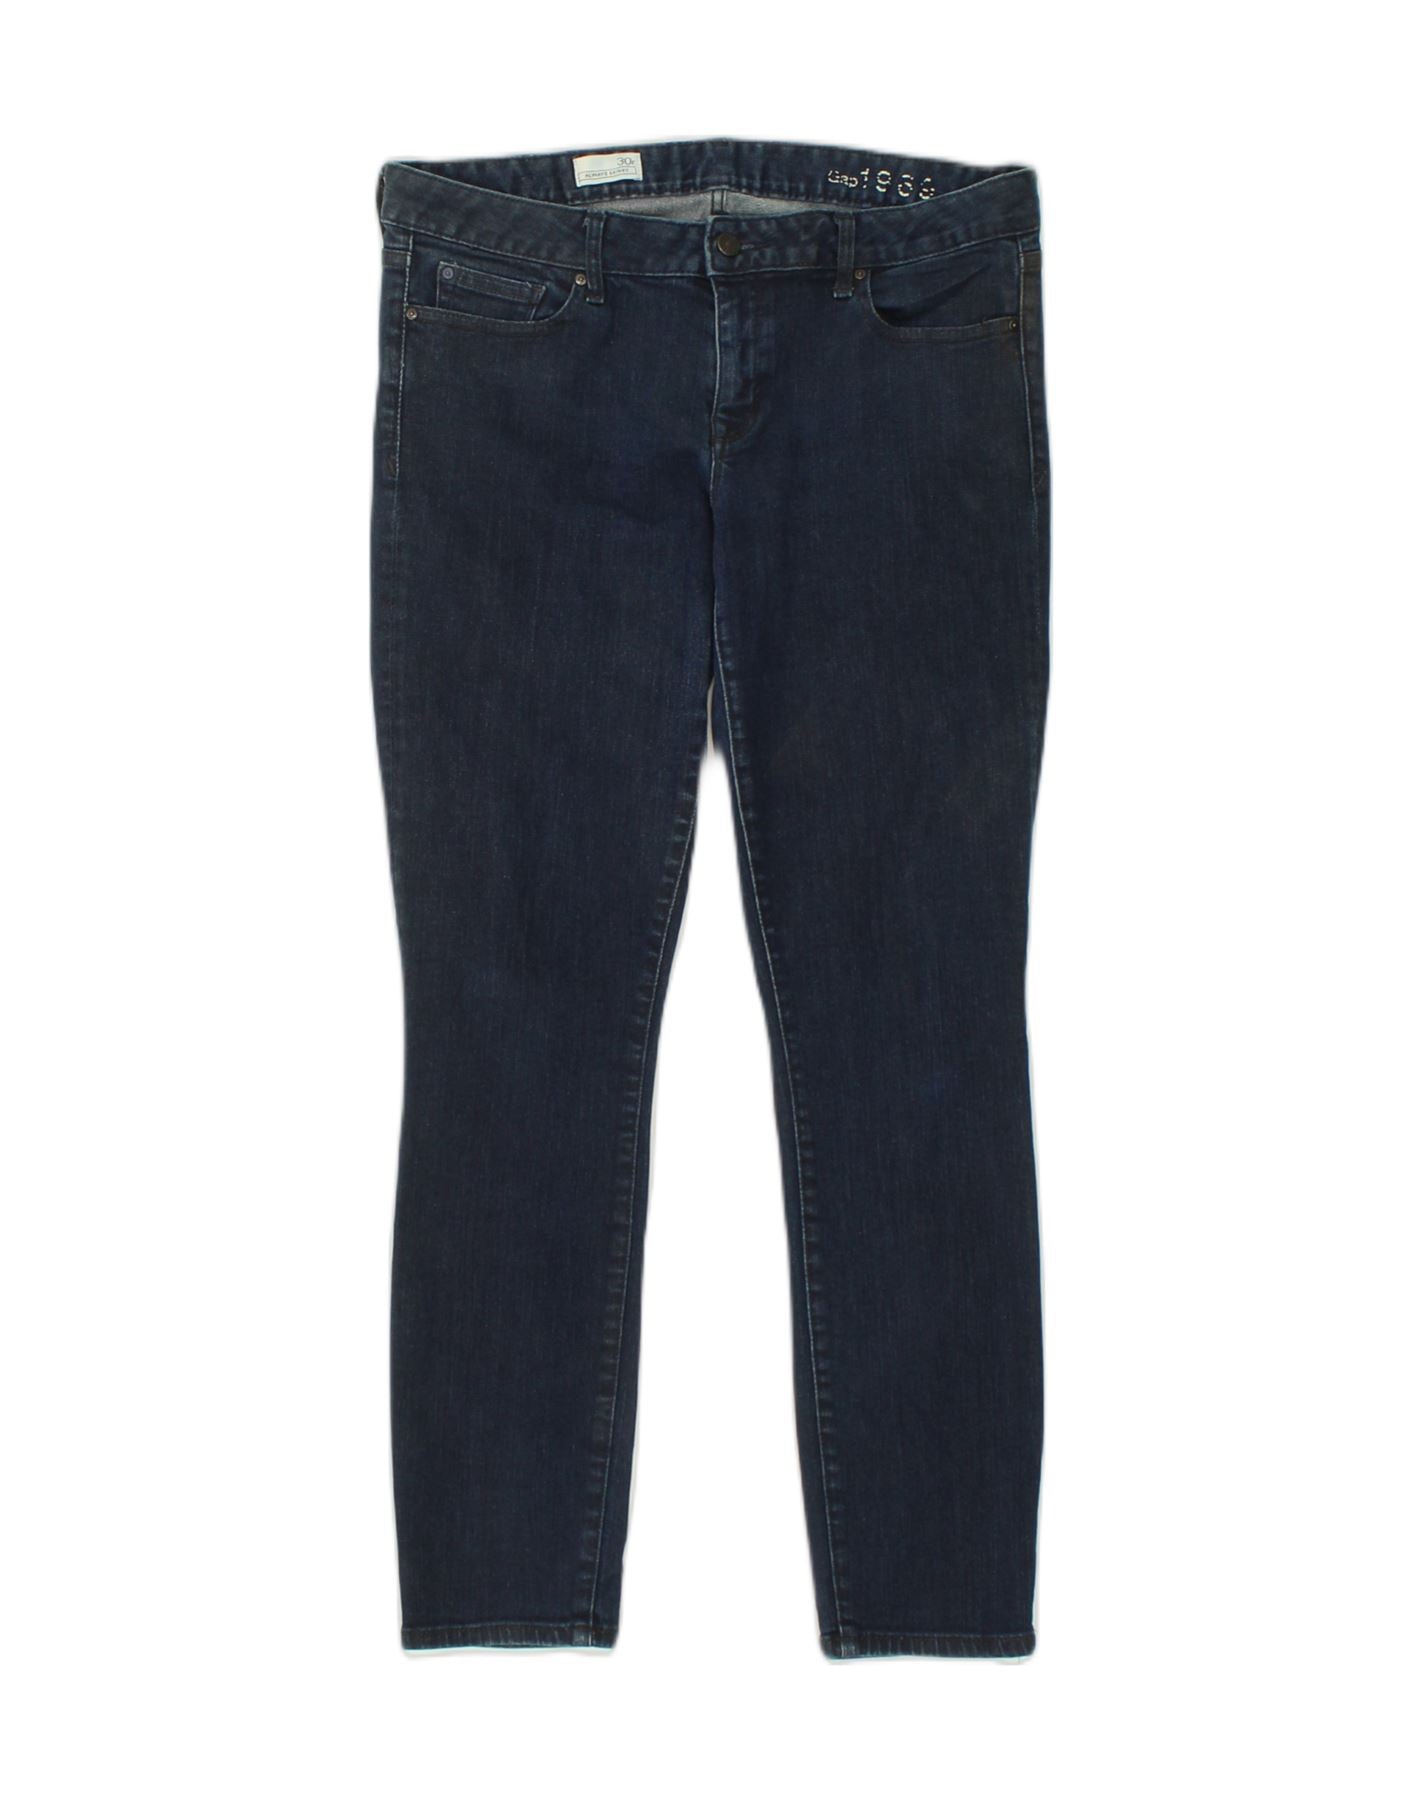 GAP Womens Comfort Fit Skinny Jeans W30 L29 Navy Blue Cotton, Vintage &  Second-Hand Clothing Online